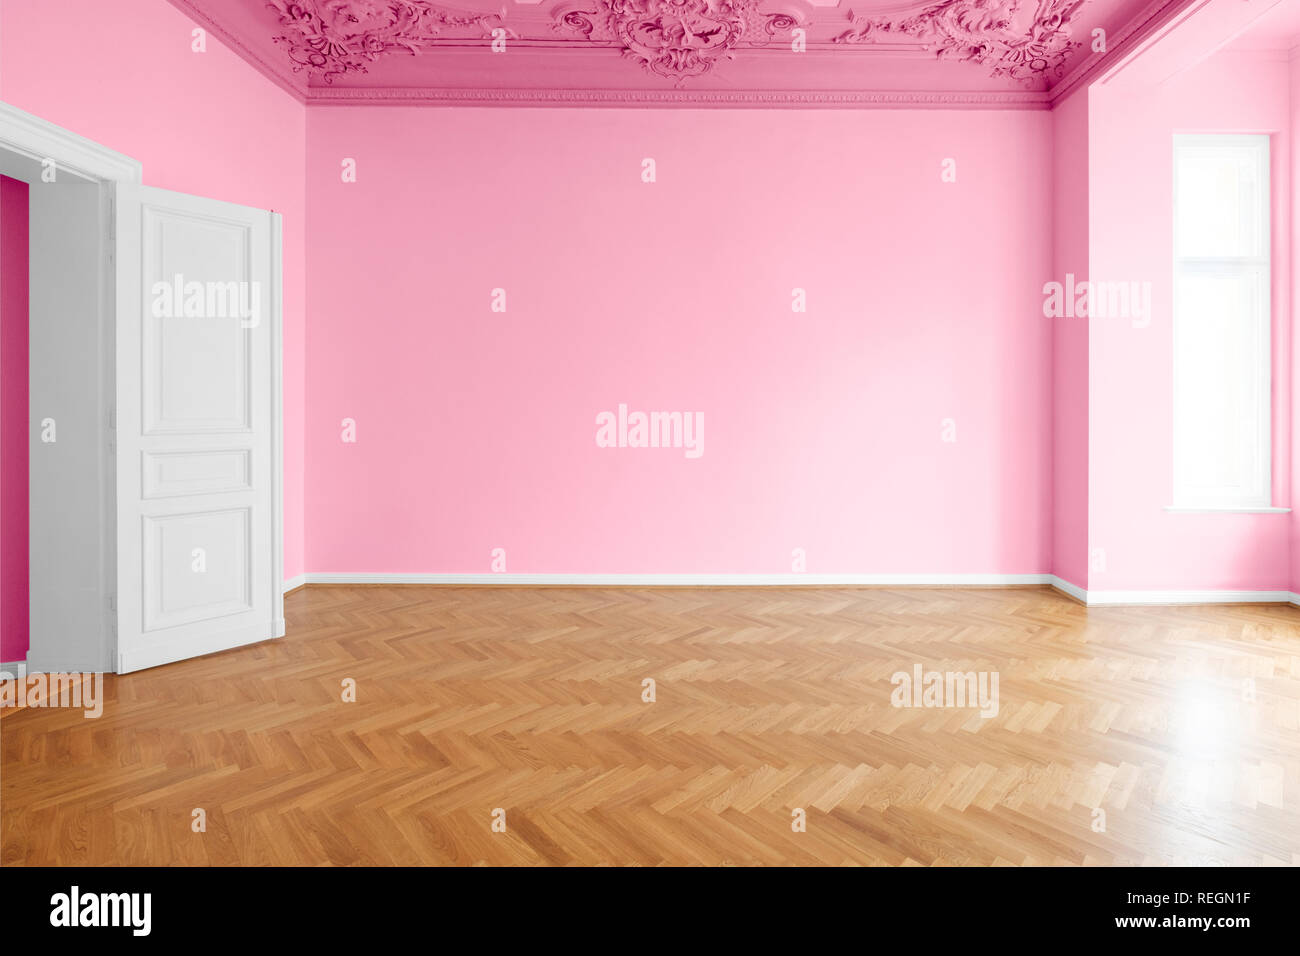 xx colored walls in new painted room after renovation Stock Photo